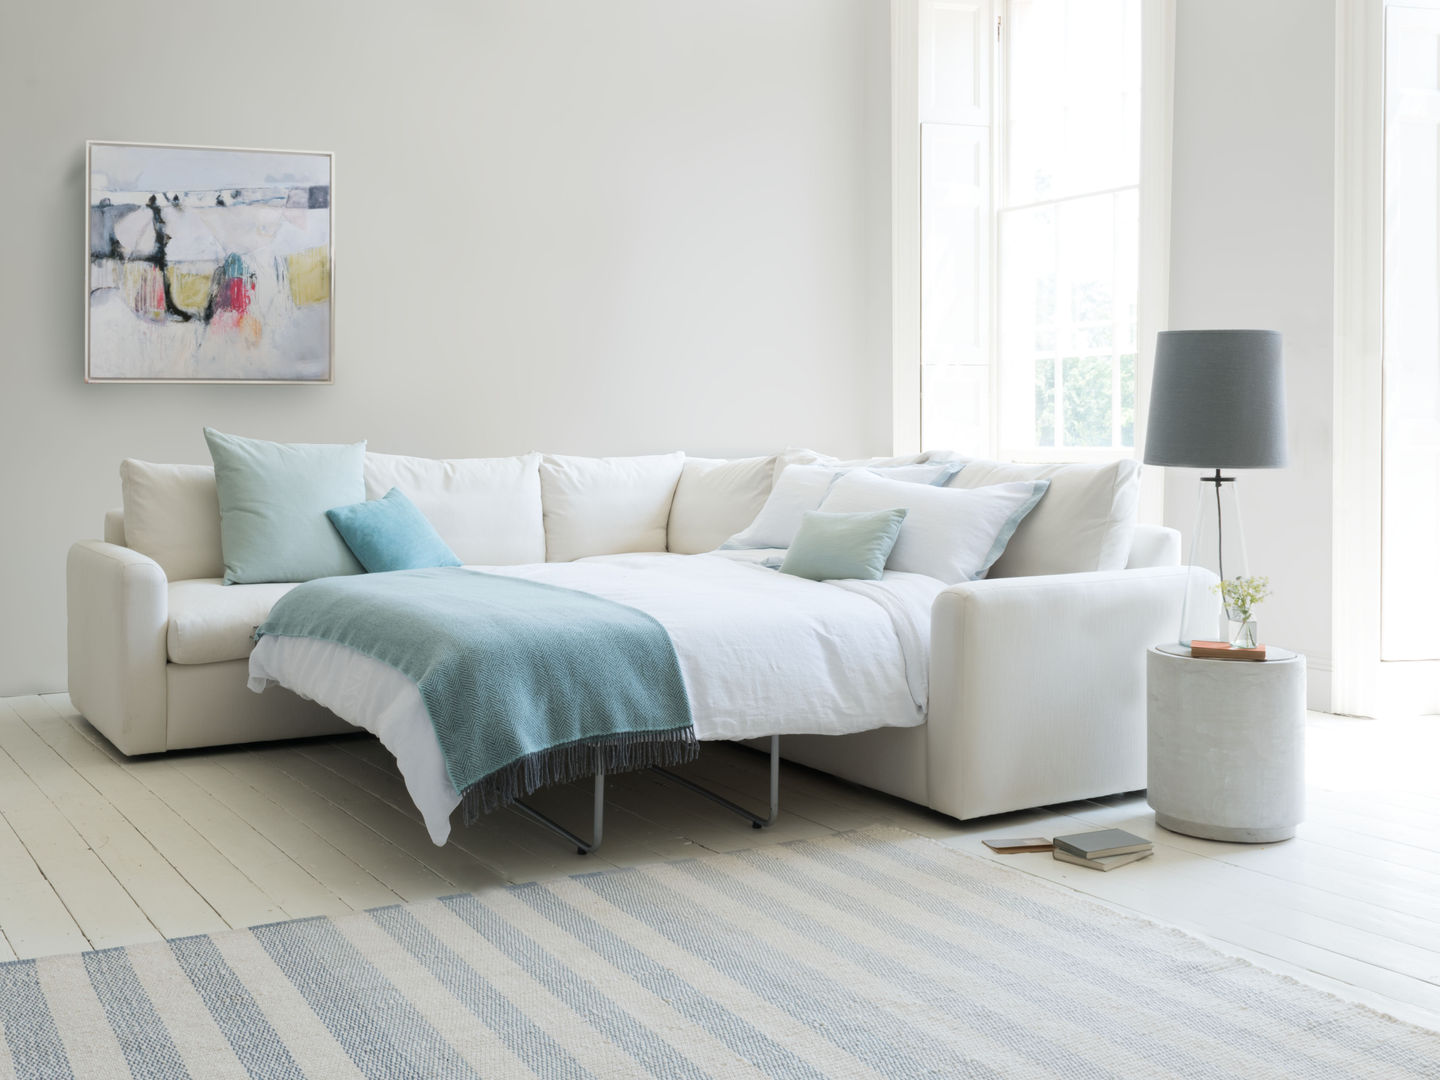 Chatnap with sofa bed Loaf Moderne woonkamers sofa,living room,home,modular sofa,sofa bed,linen,white,space